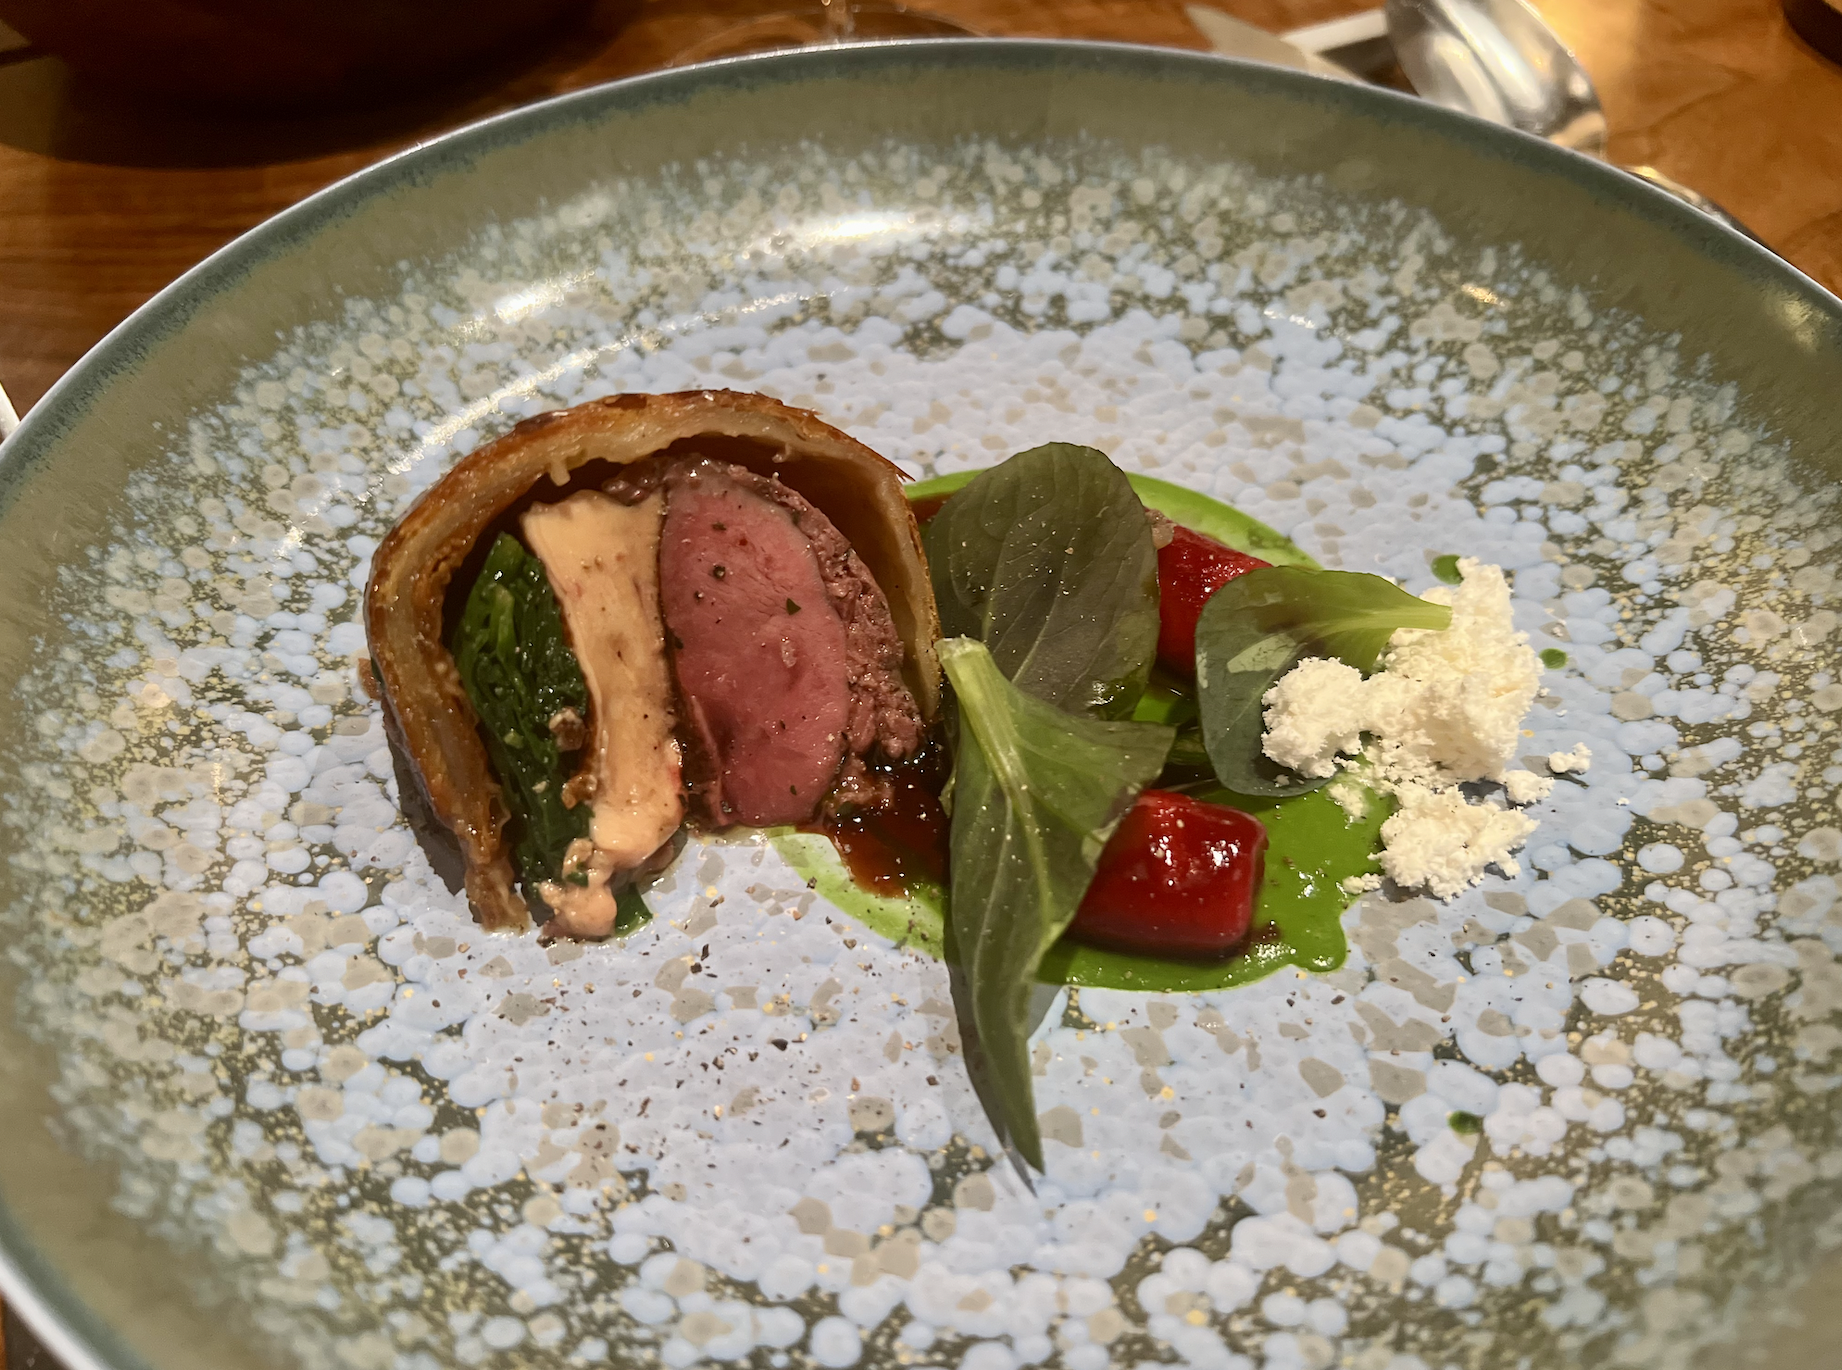 Flying on La Compagnie all-business class airline from Paris to New York &mdash; a pigeon dish made at David Toutain's restaurant in Paris.